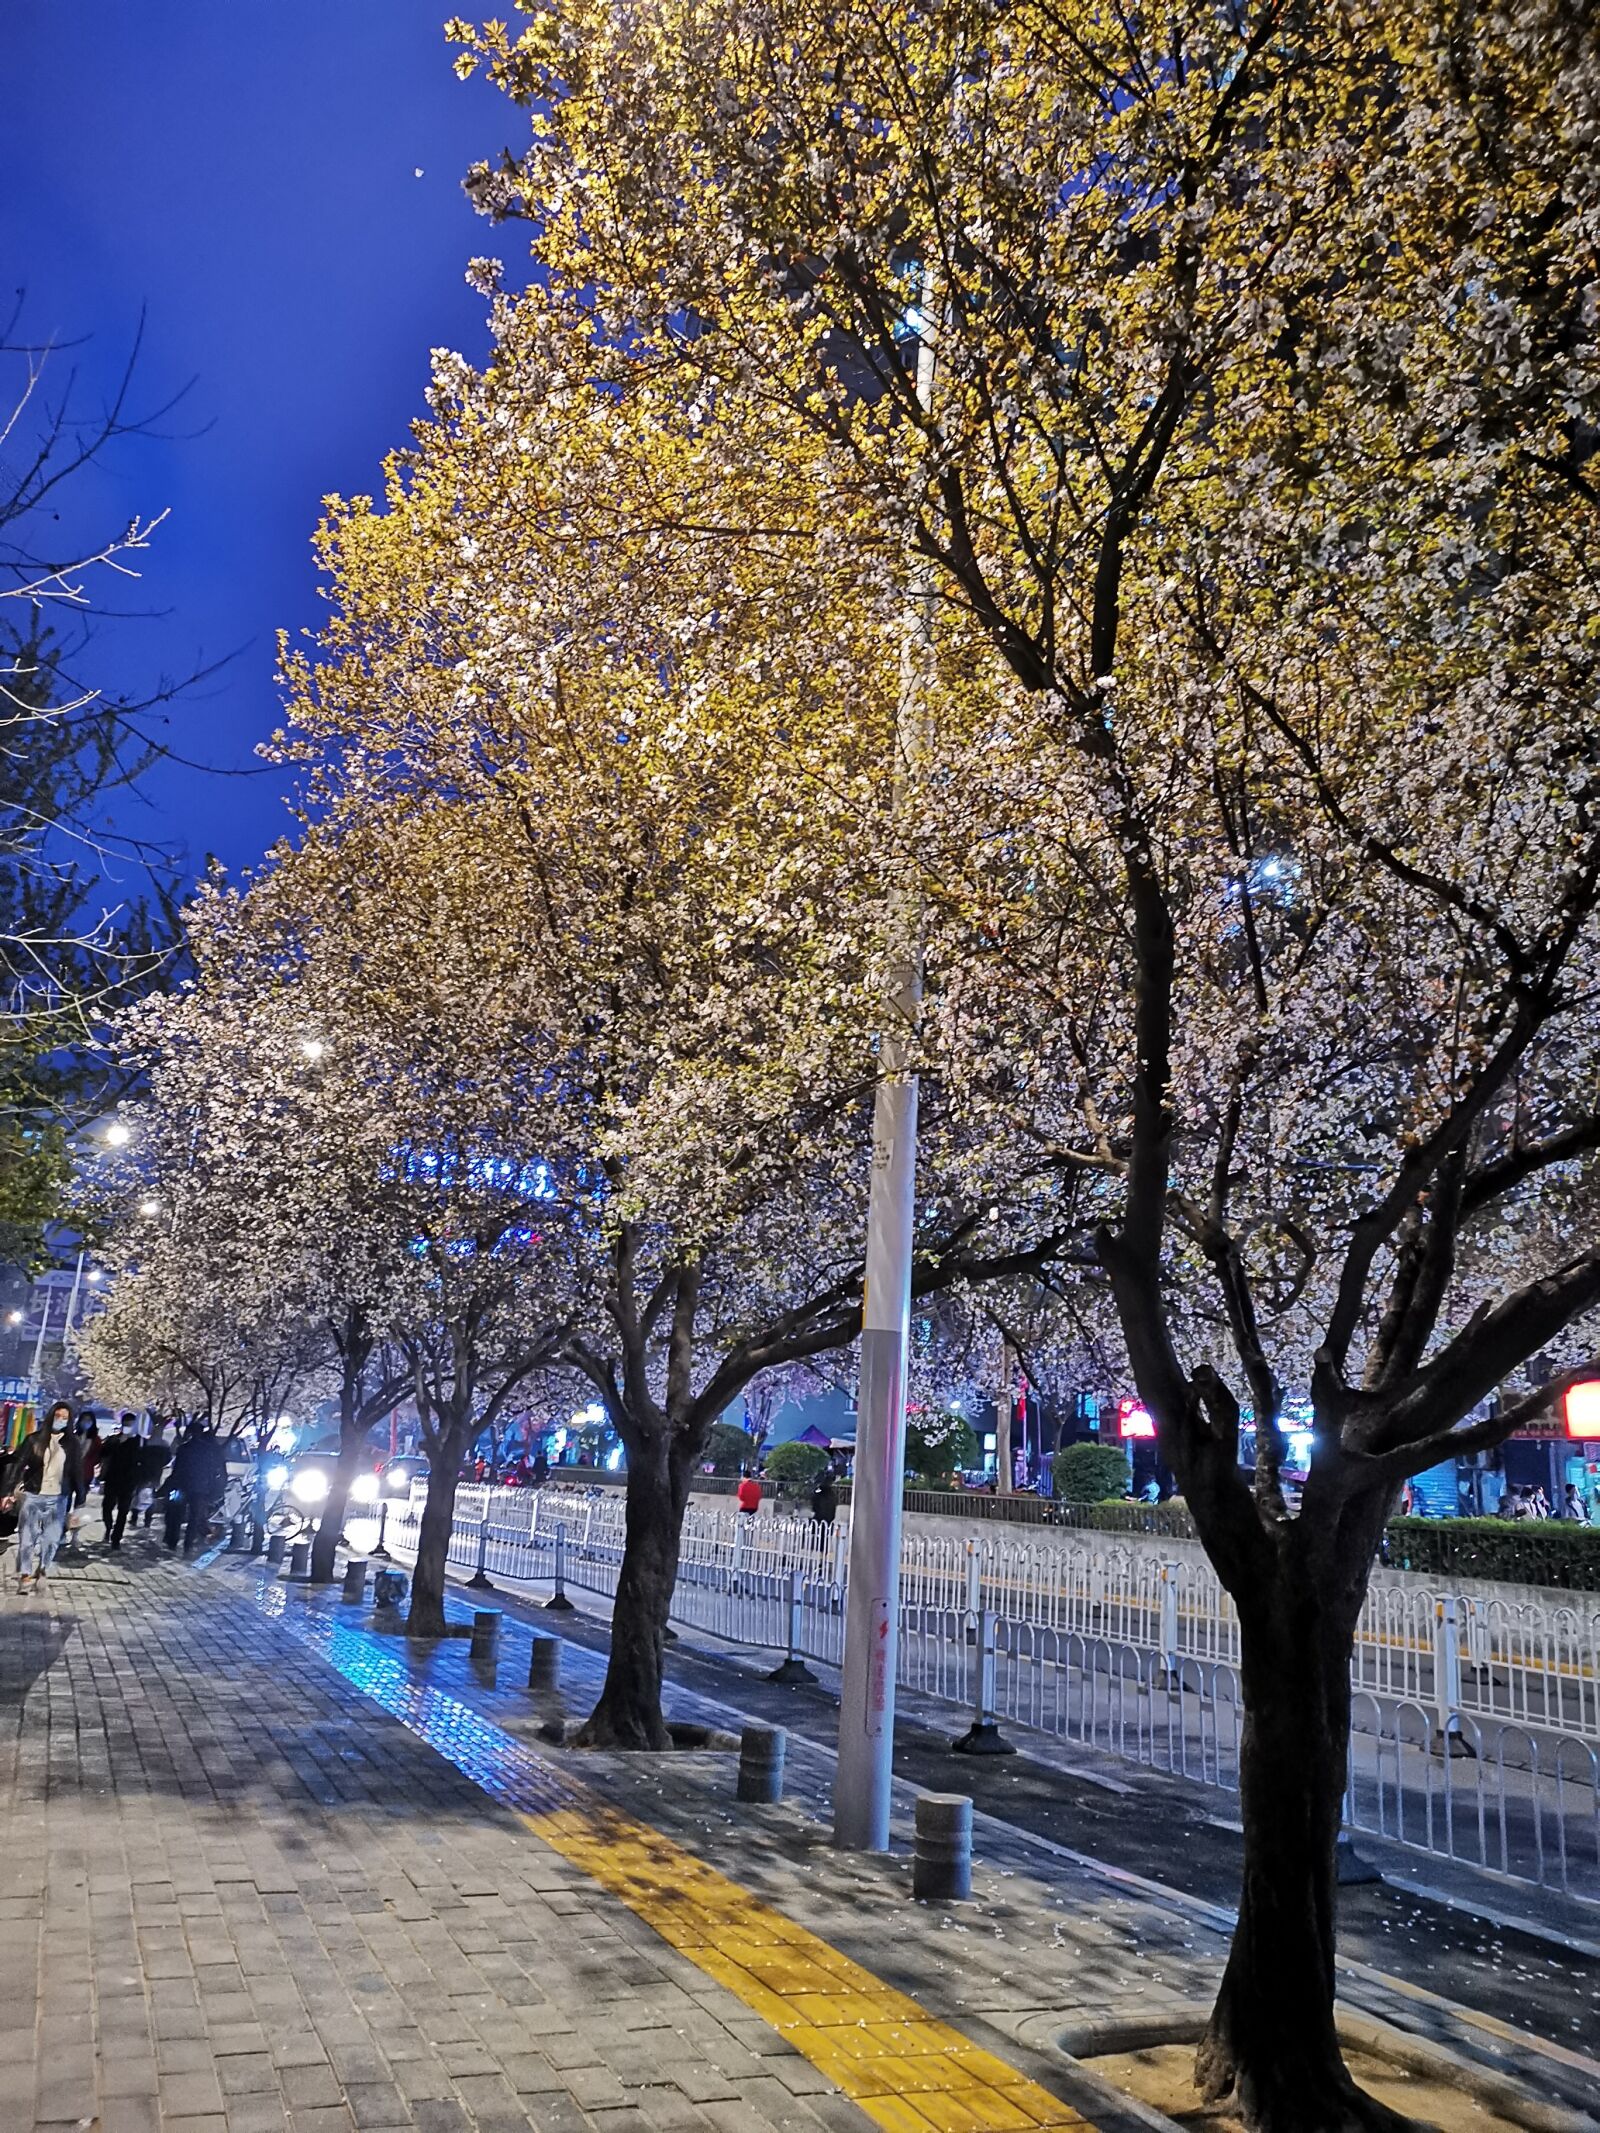 HUAWEI Mate 20 Pro sample photo. Cherry blossom, flower, road photography